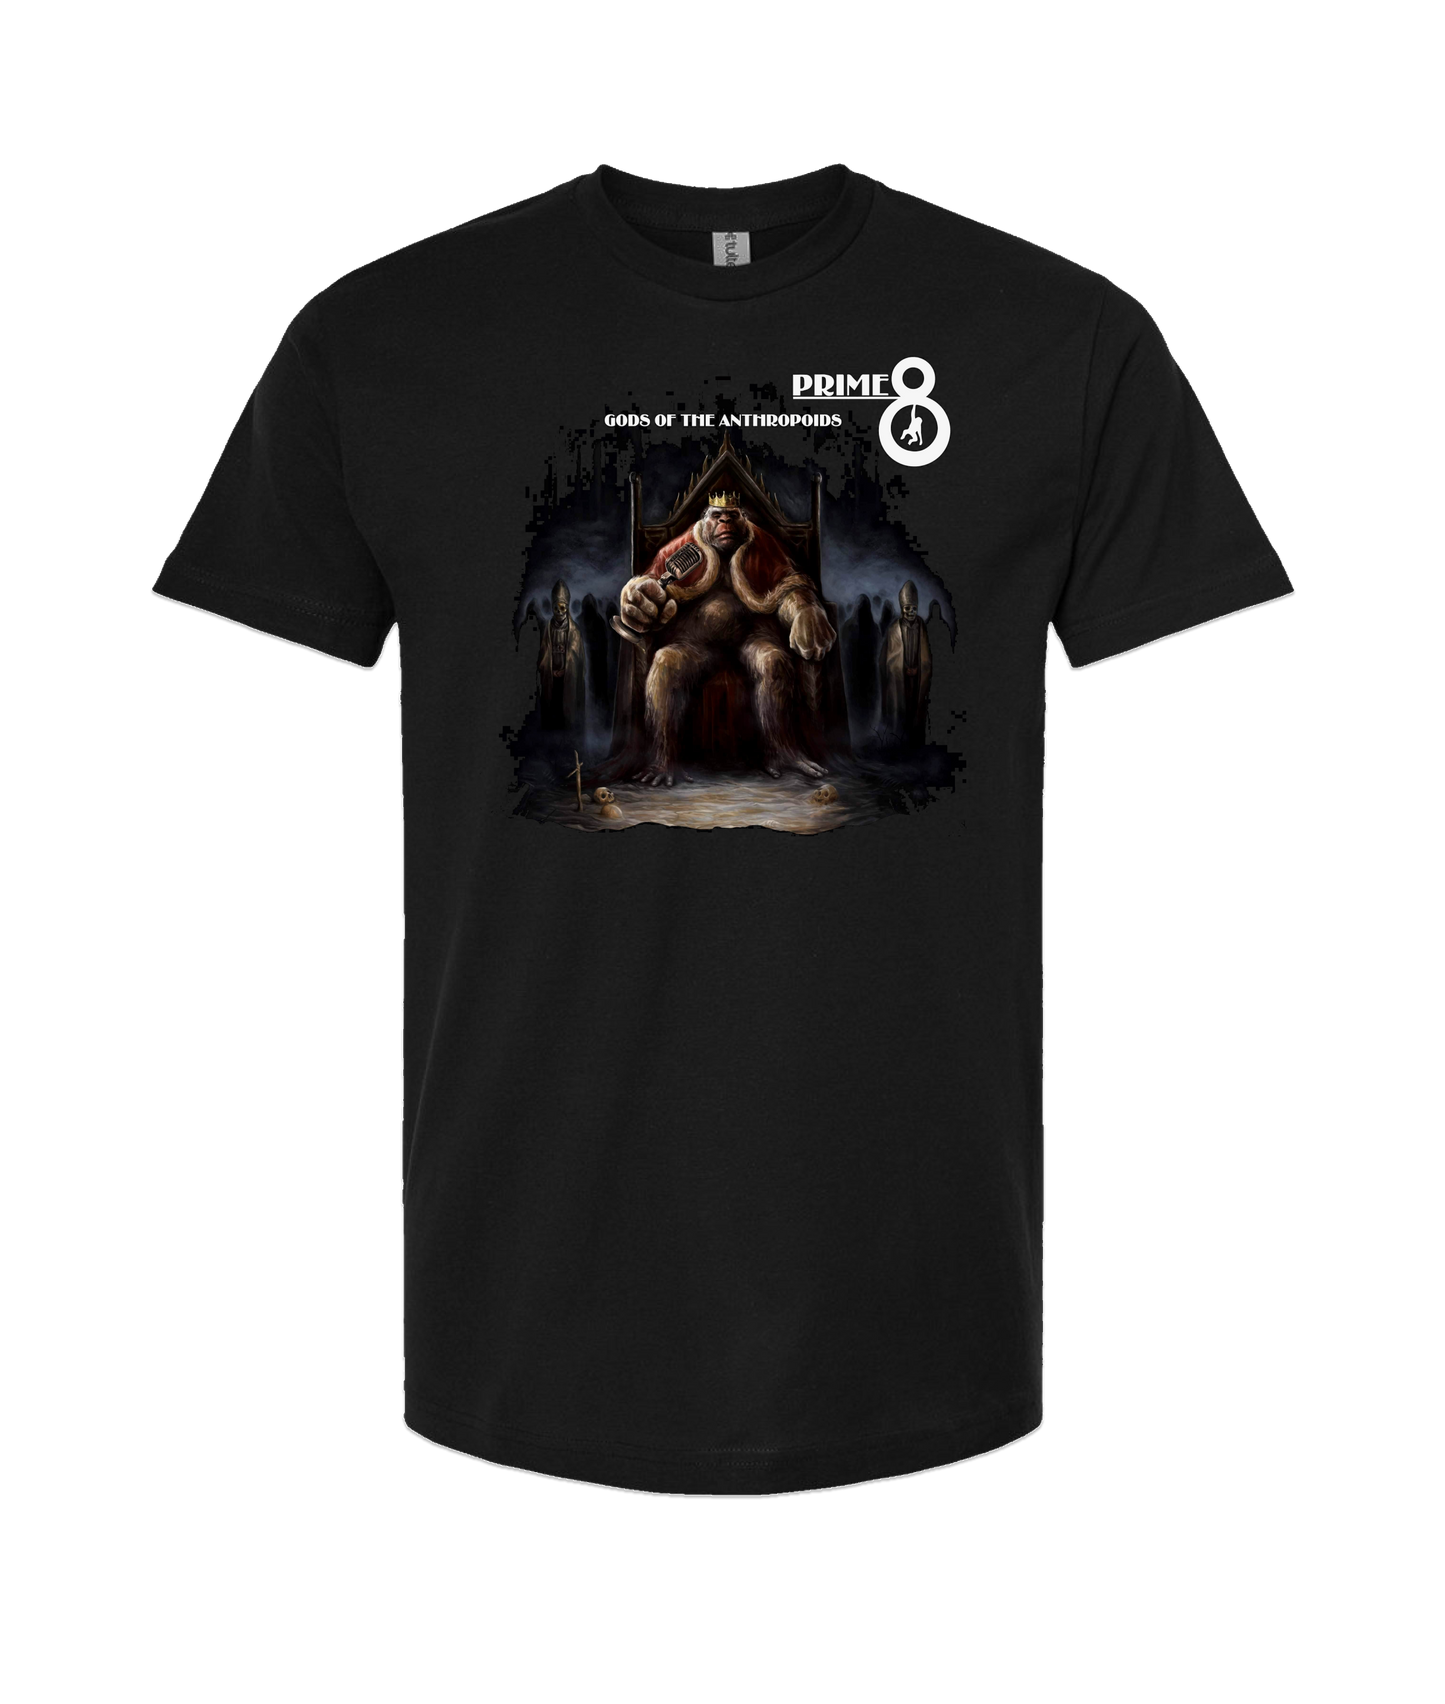 Prime 8 - Gods of the Anthropoids (EP) - Black T-Shirt